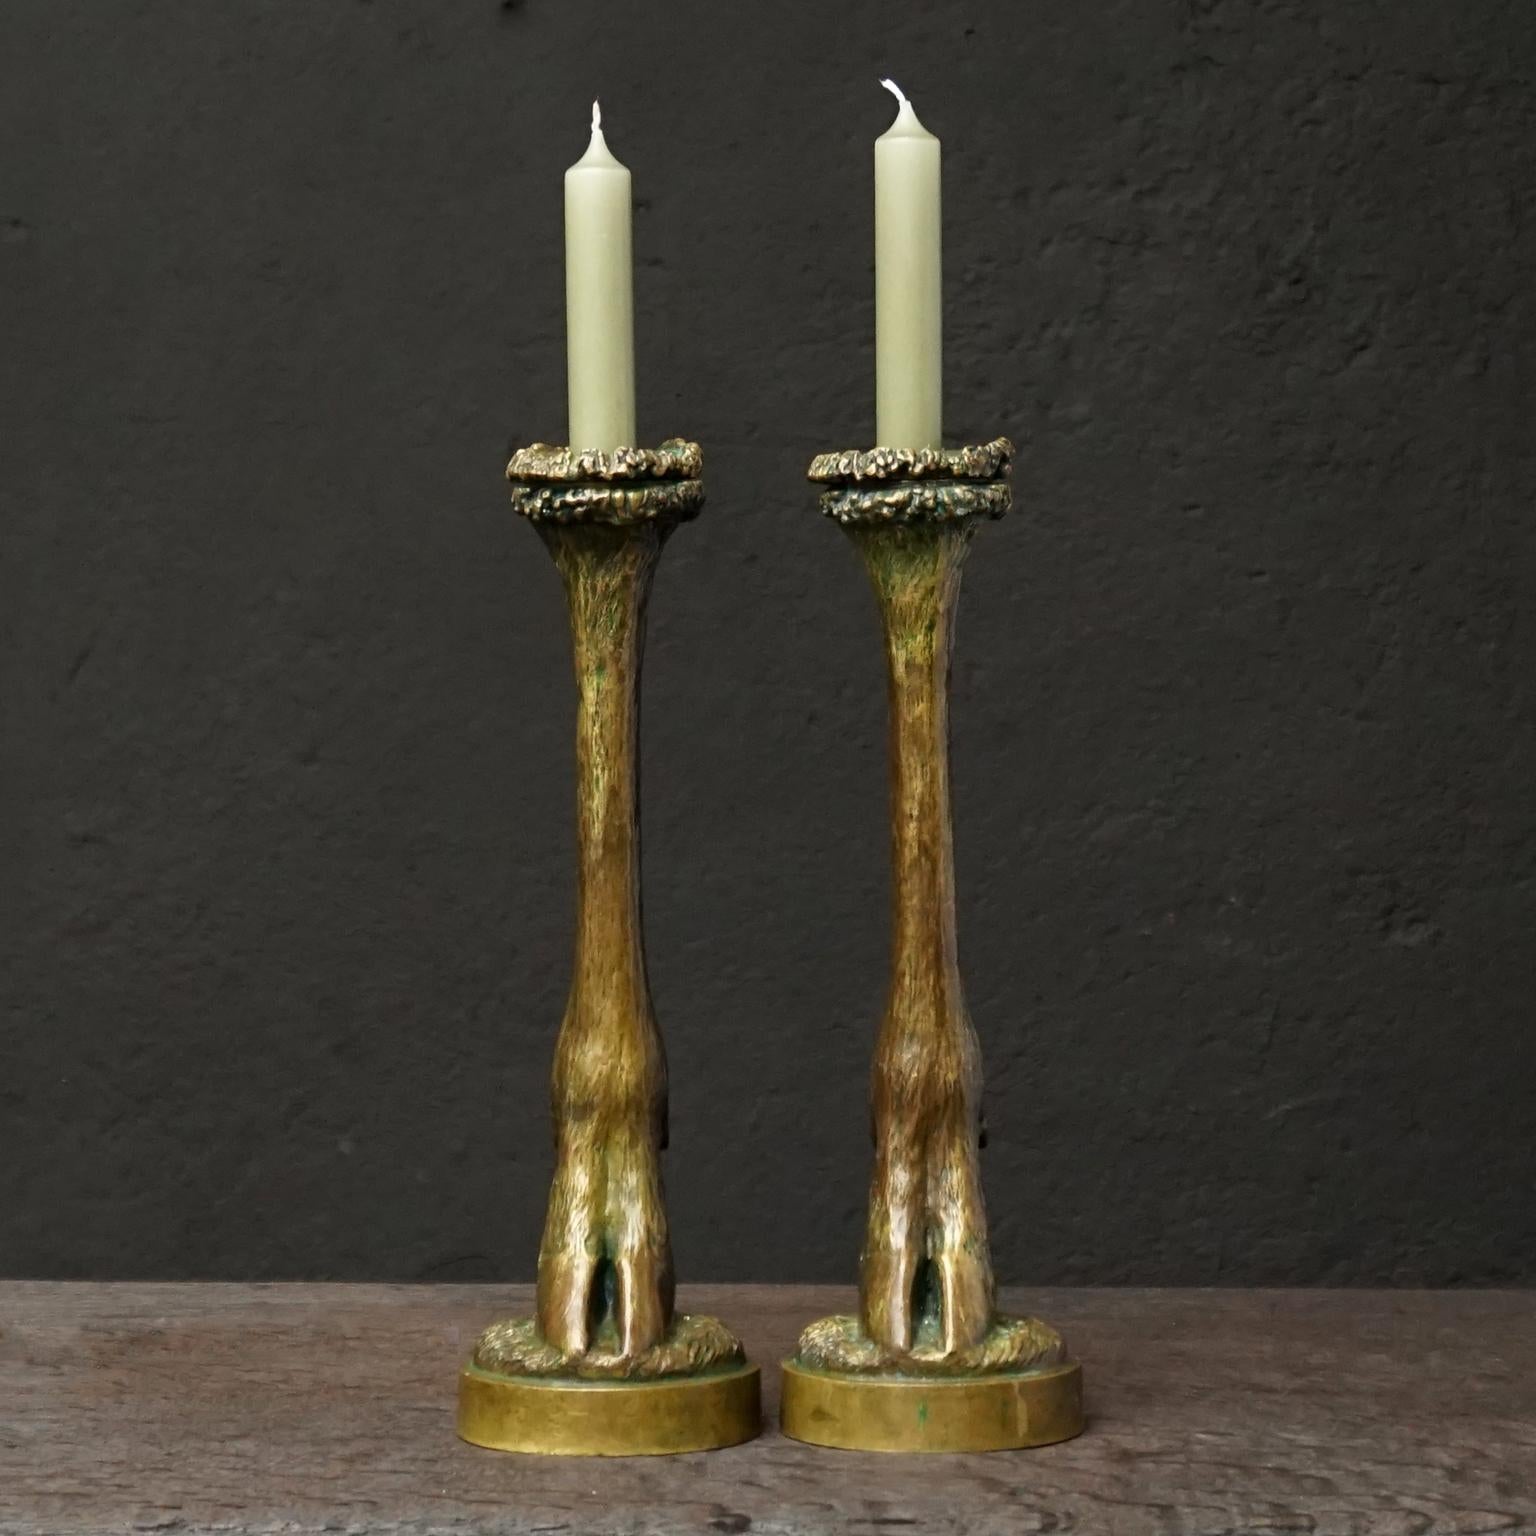 Highly decorative pair of antique 19th century French hoof shaped candlesticks in cast bronze, marked Soyer et Ingé, Fondeurs.
Very nice greenish patina from almost 200 years of use. 
This heavy bronze pair would look great in any style of